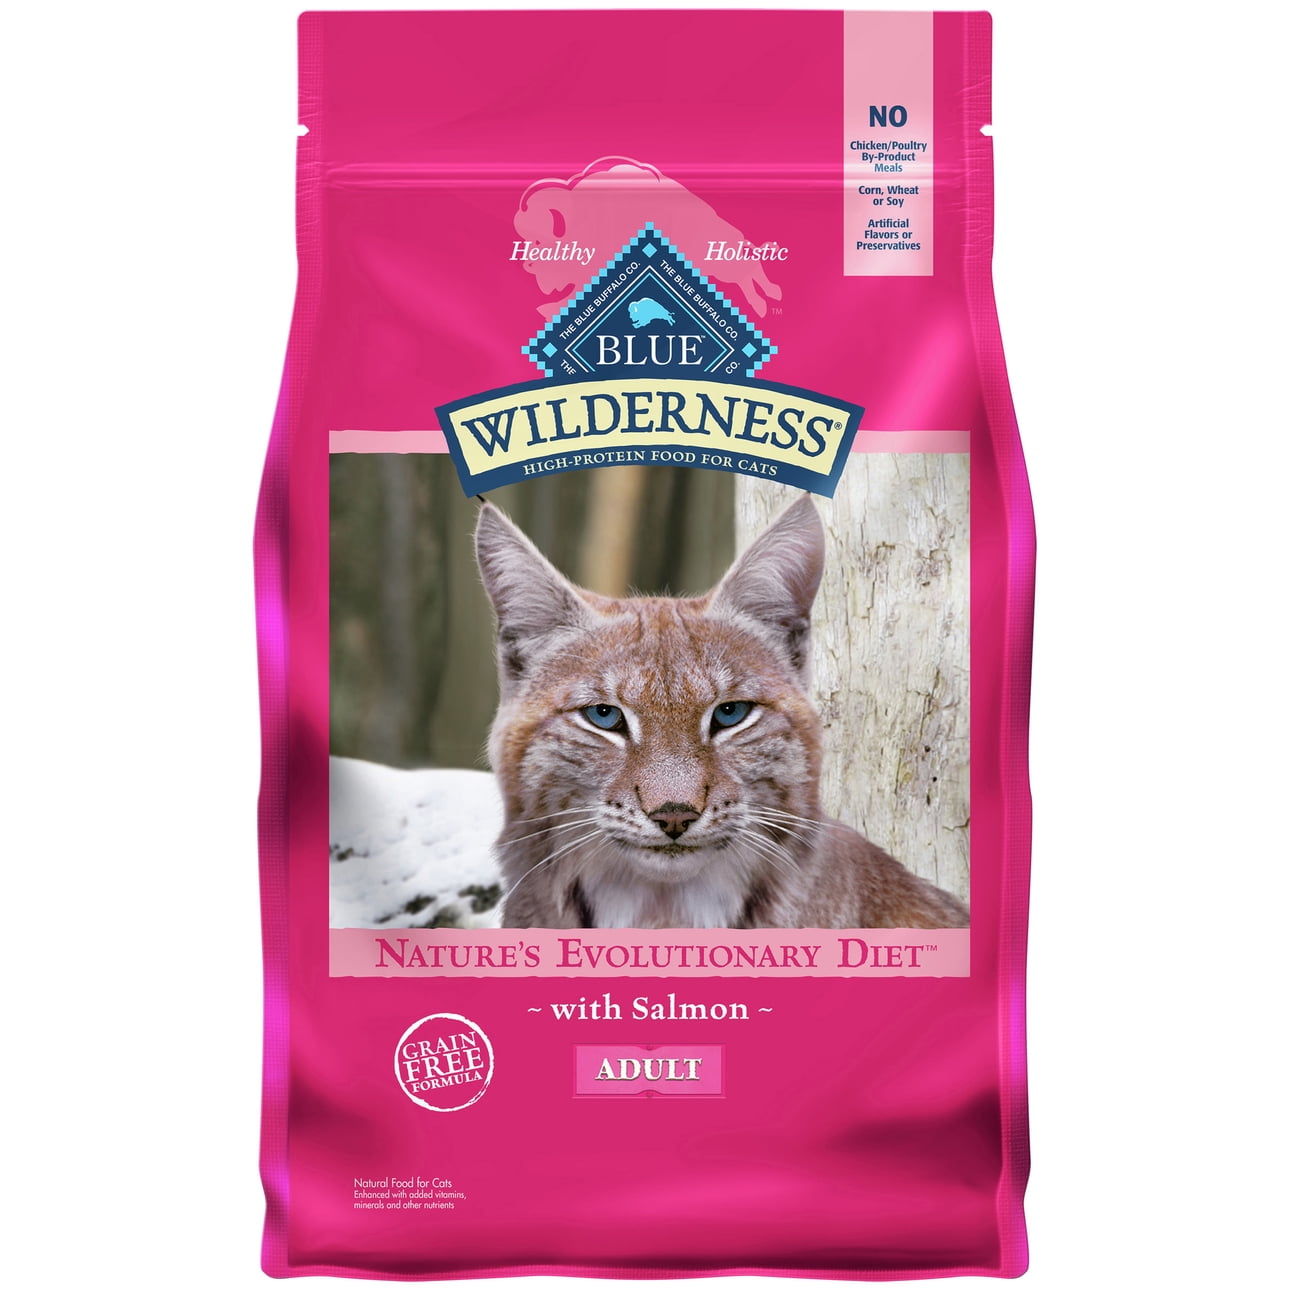 Wholesale prices with free shipping all over United States Blue Buffalo Wilderness High Protein Salmon Dry Cat Food for Adult Cats, Grain-Free, 4 lb. Bag - Steven Deals